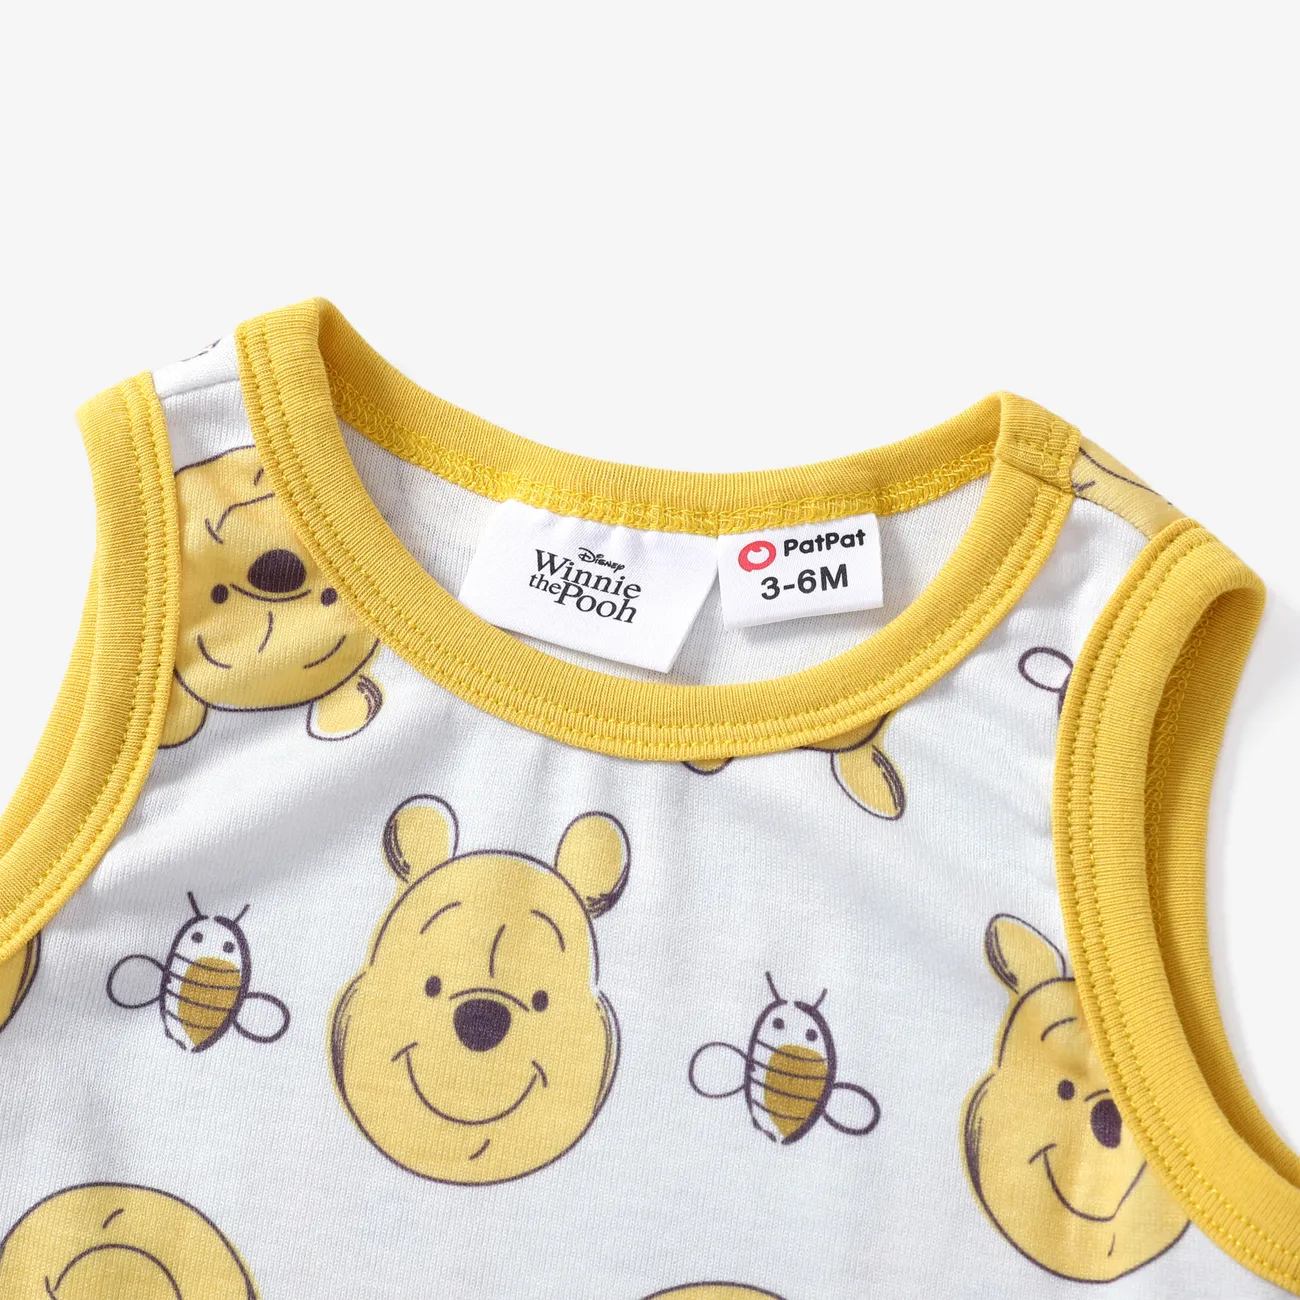 Disney Winnie the Pooh Baby Boys/Girls 1pc Naia™ Character All-over Print Short-sleeve Romper Yellow big image 1